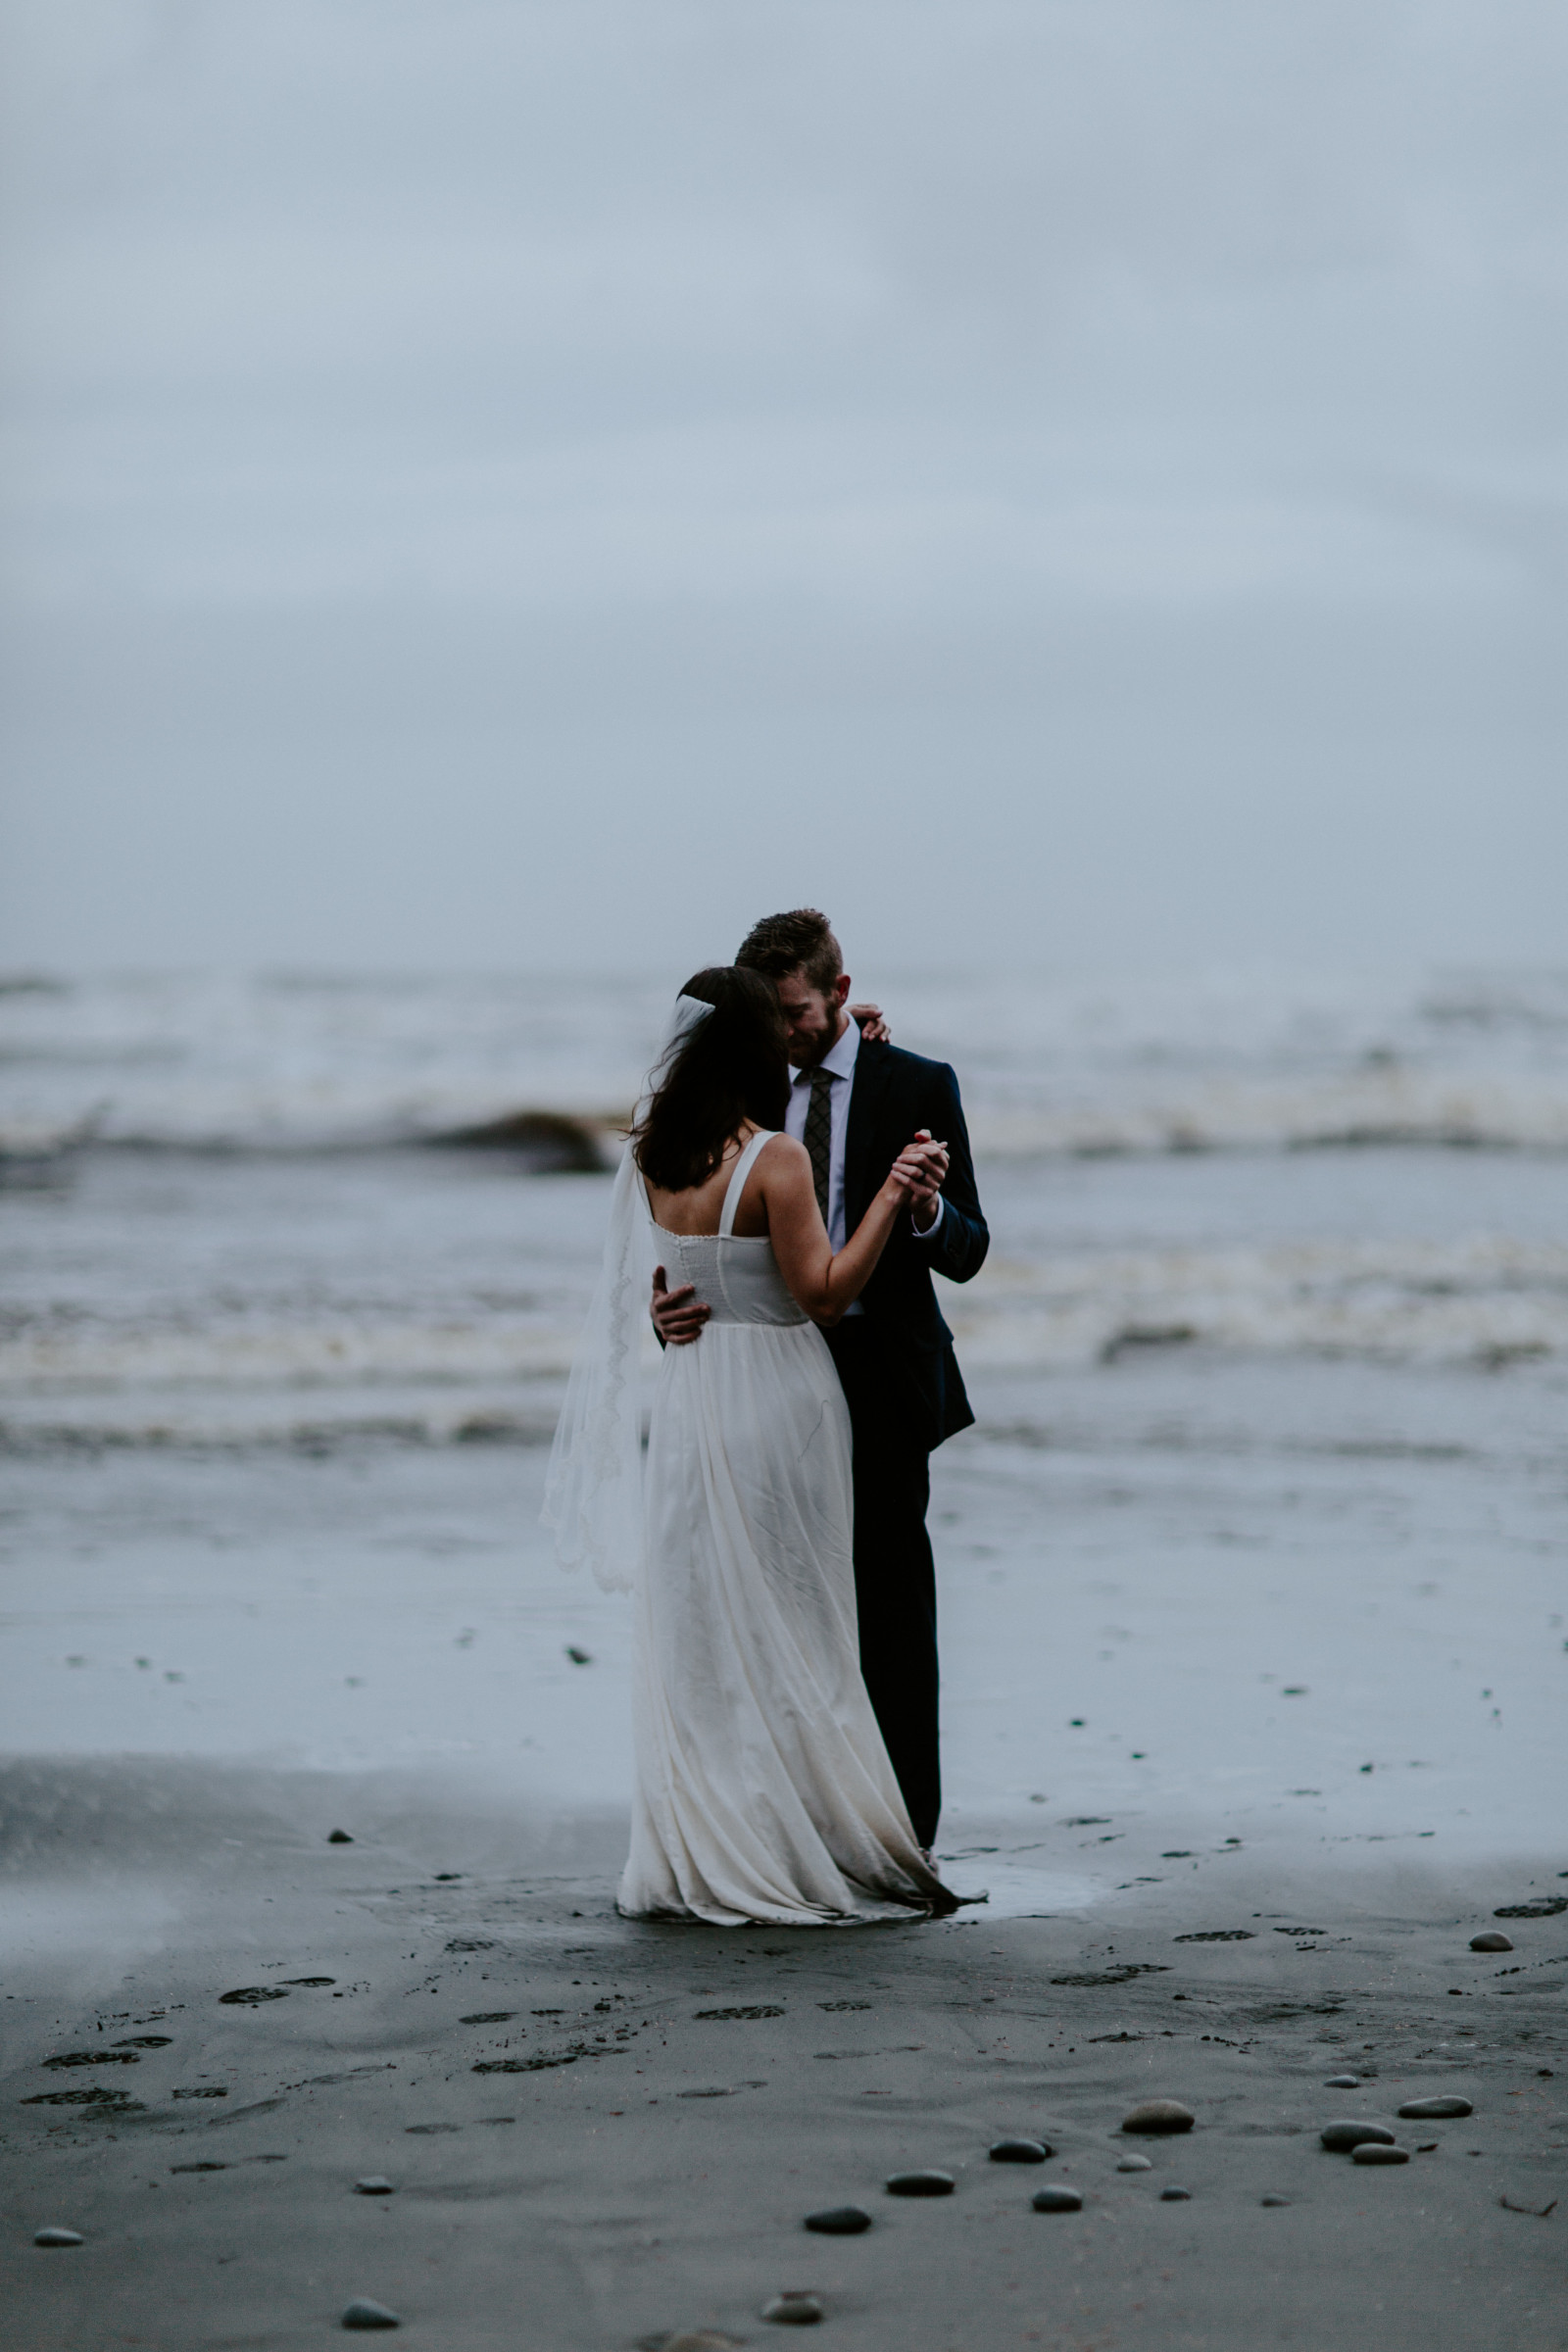 Corey and Mollie share their first dance on the beach. Elopement photography at Olympic National Park by Sienna Plus Josh.